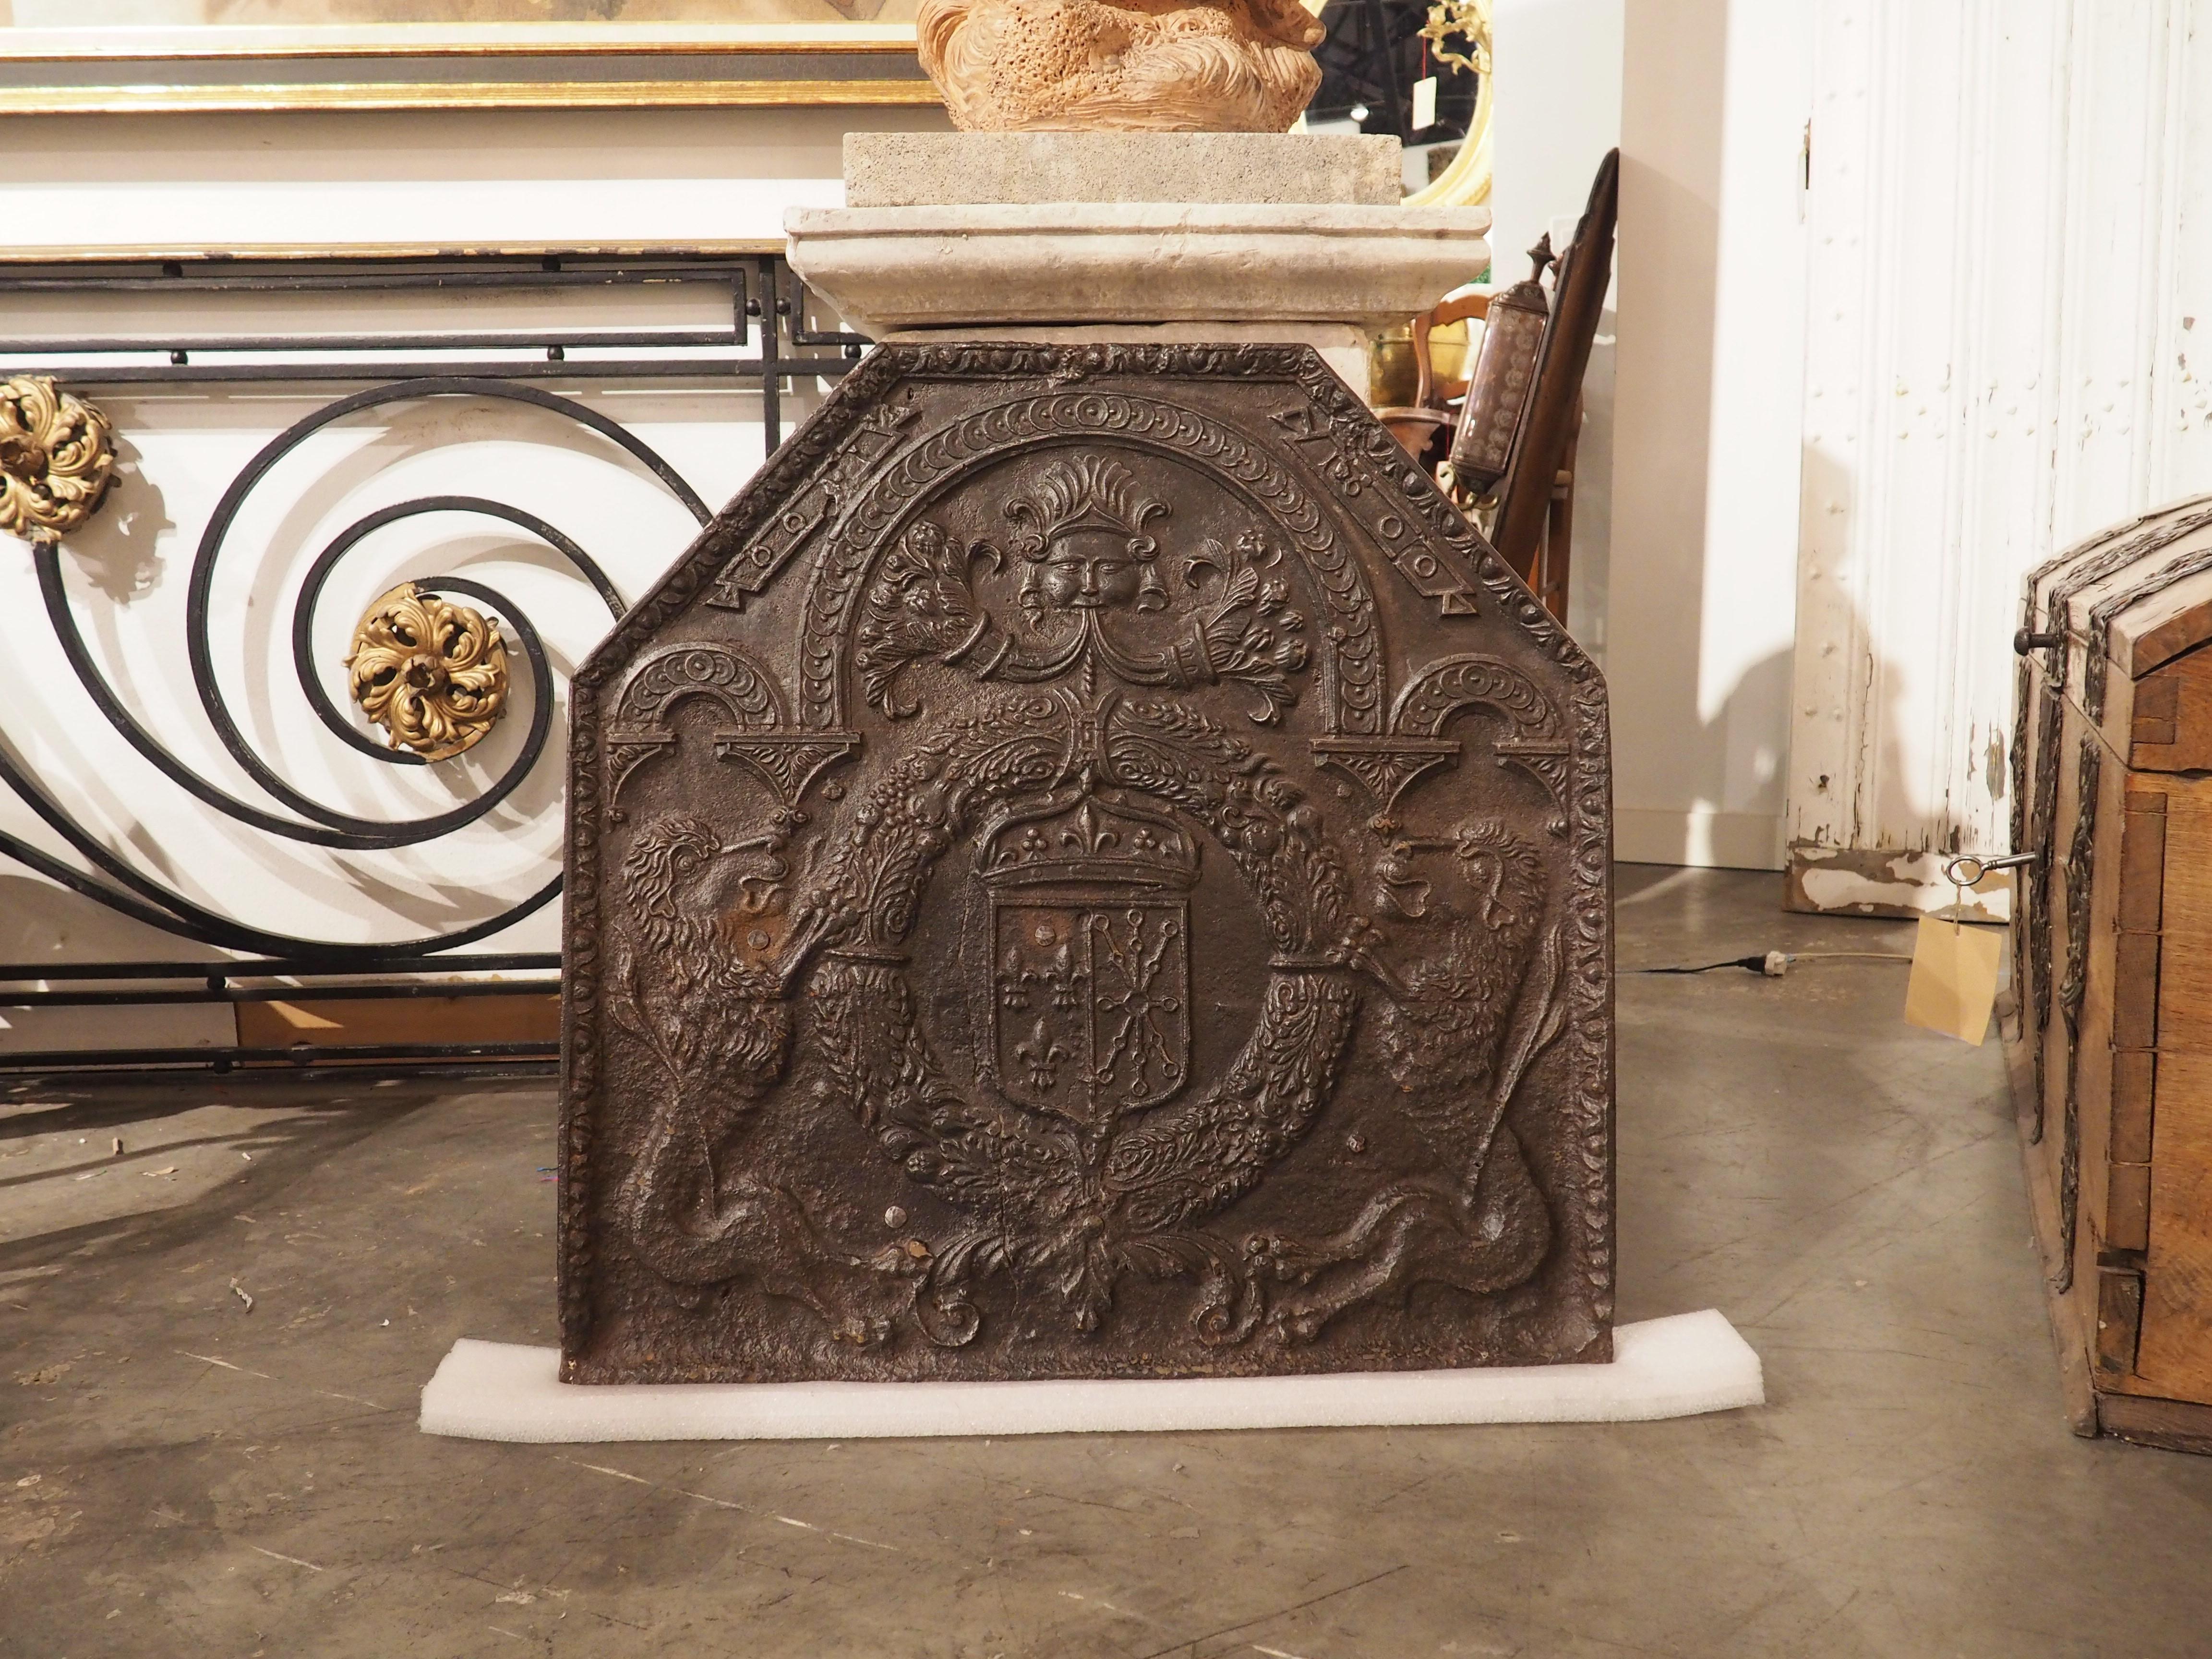 Circa 1600 French Cast Iron Fireback, the Coat of Arms of King Henry IV In Good Condition For Sale In Dallas, TX